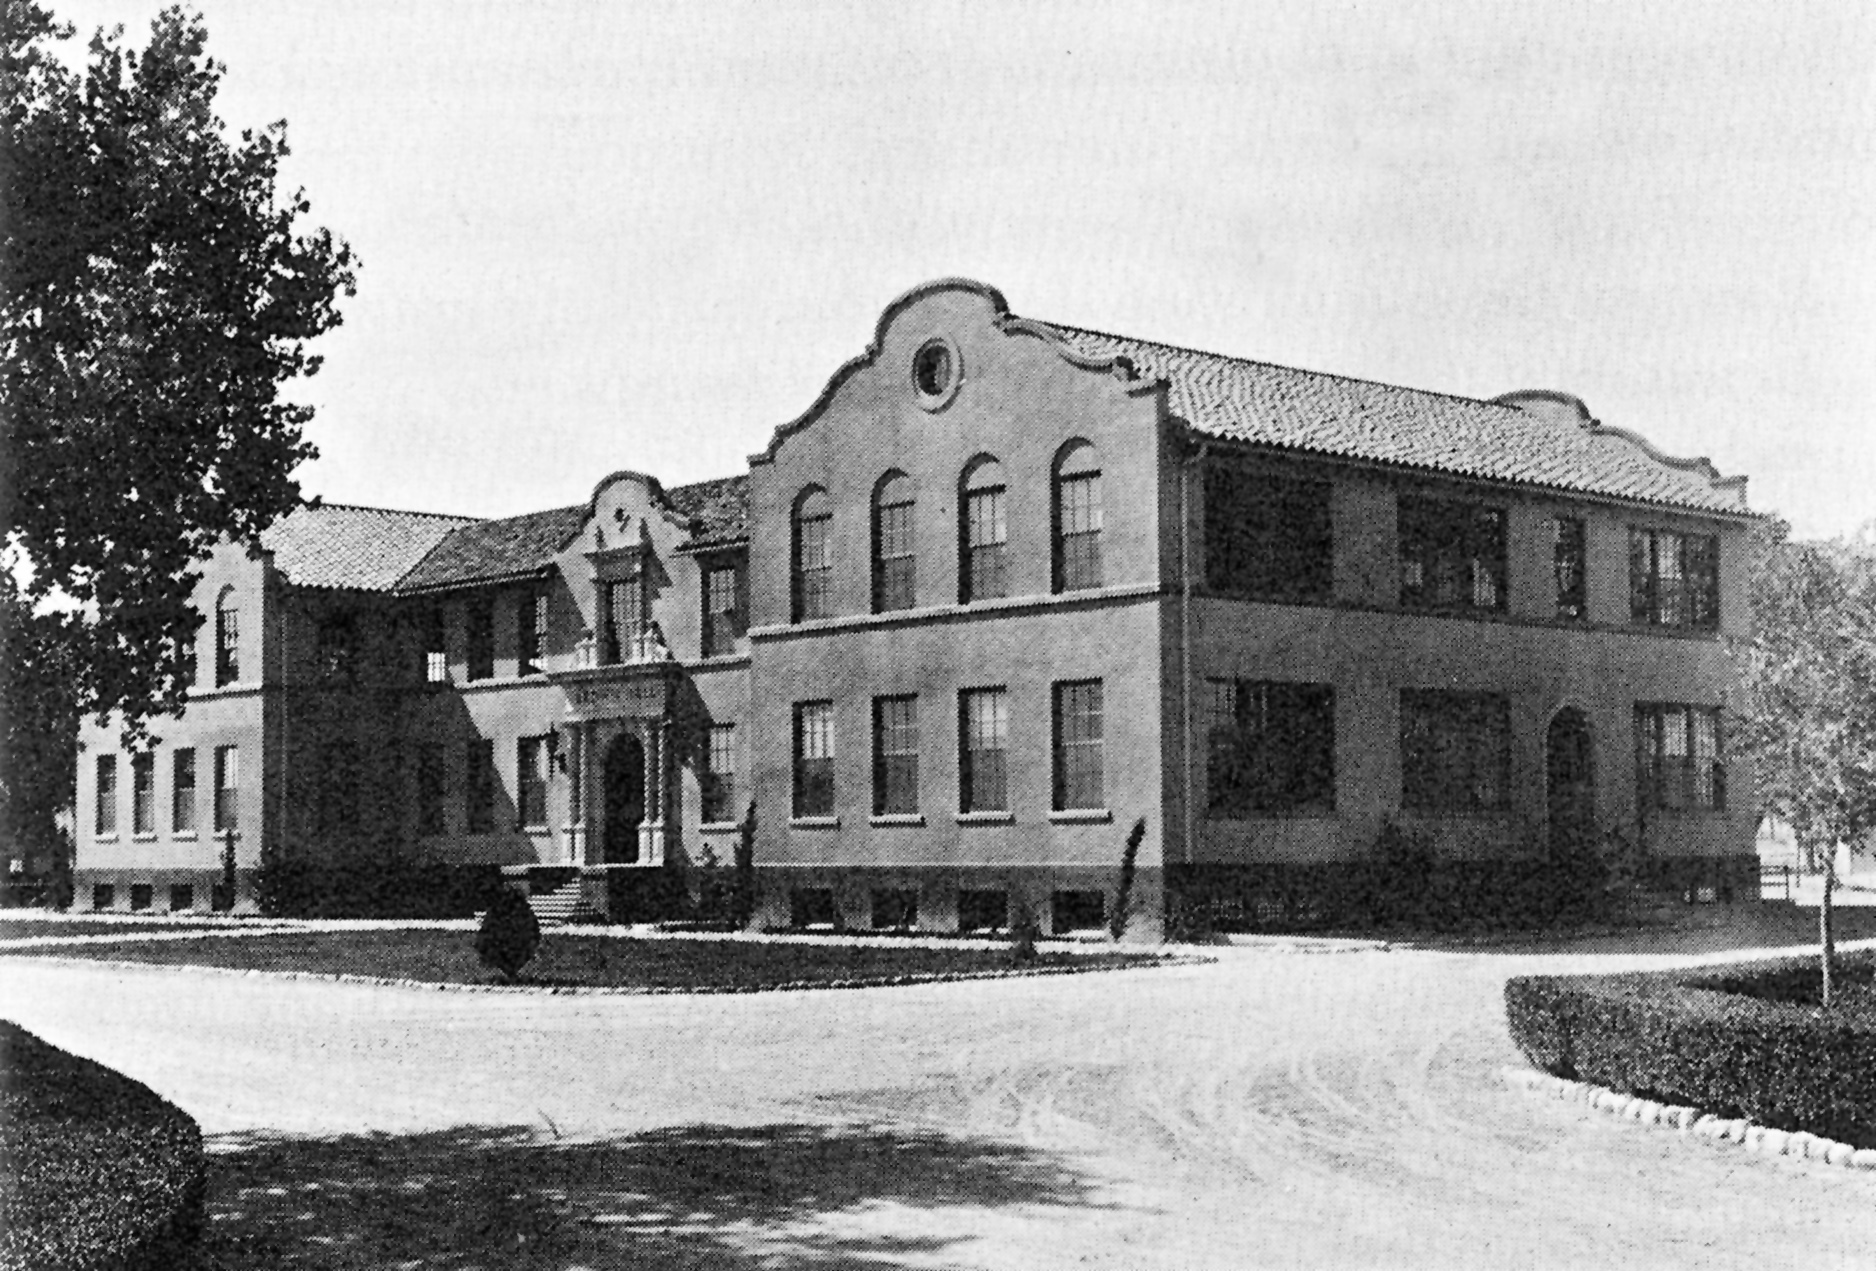 Brown Hall early 1930s